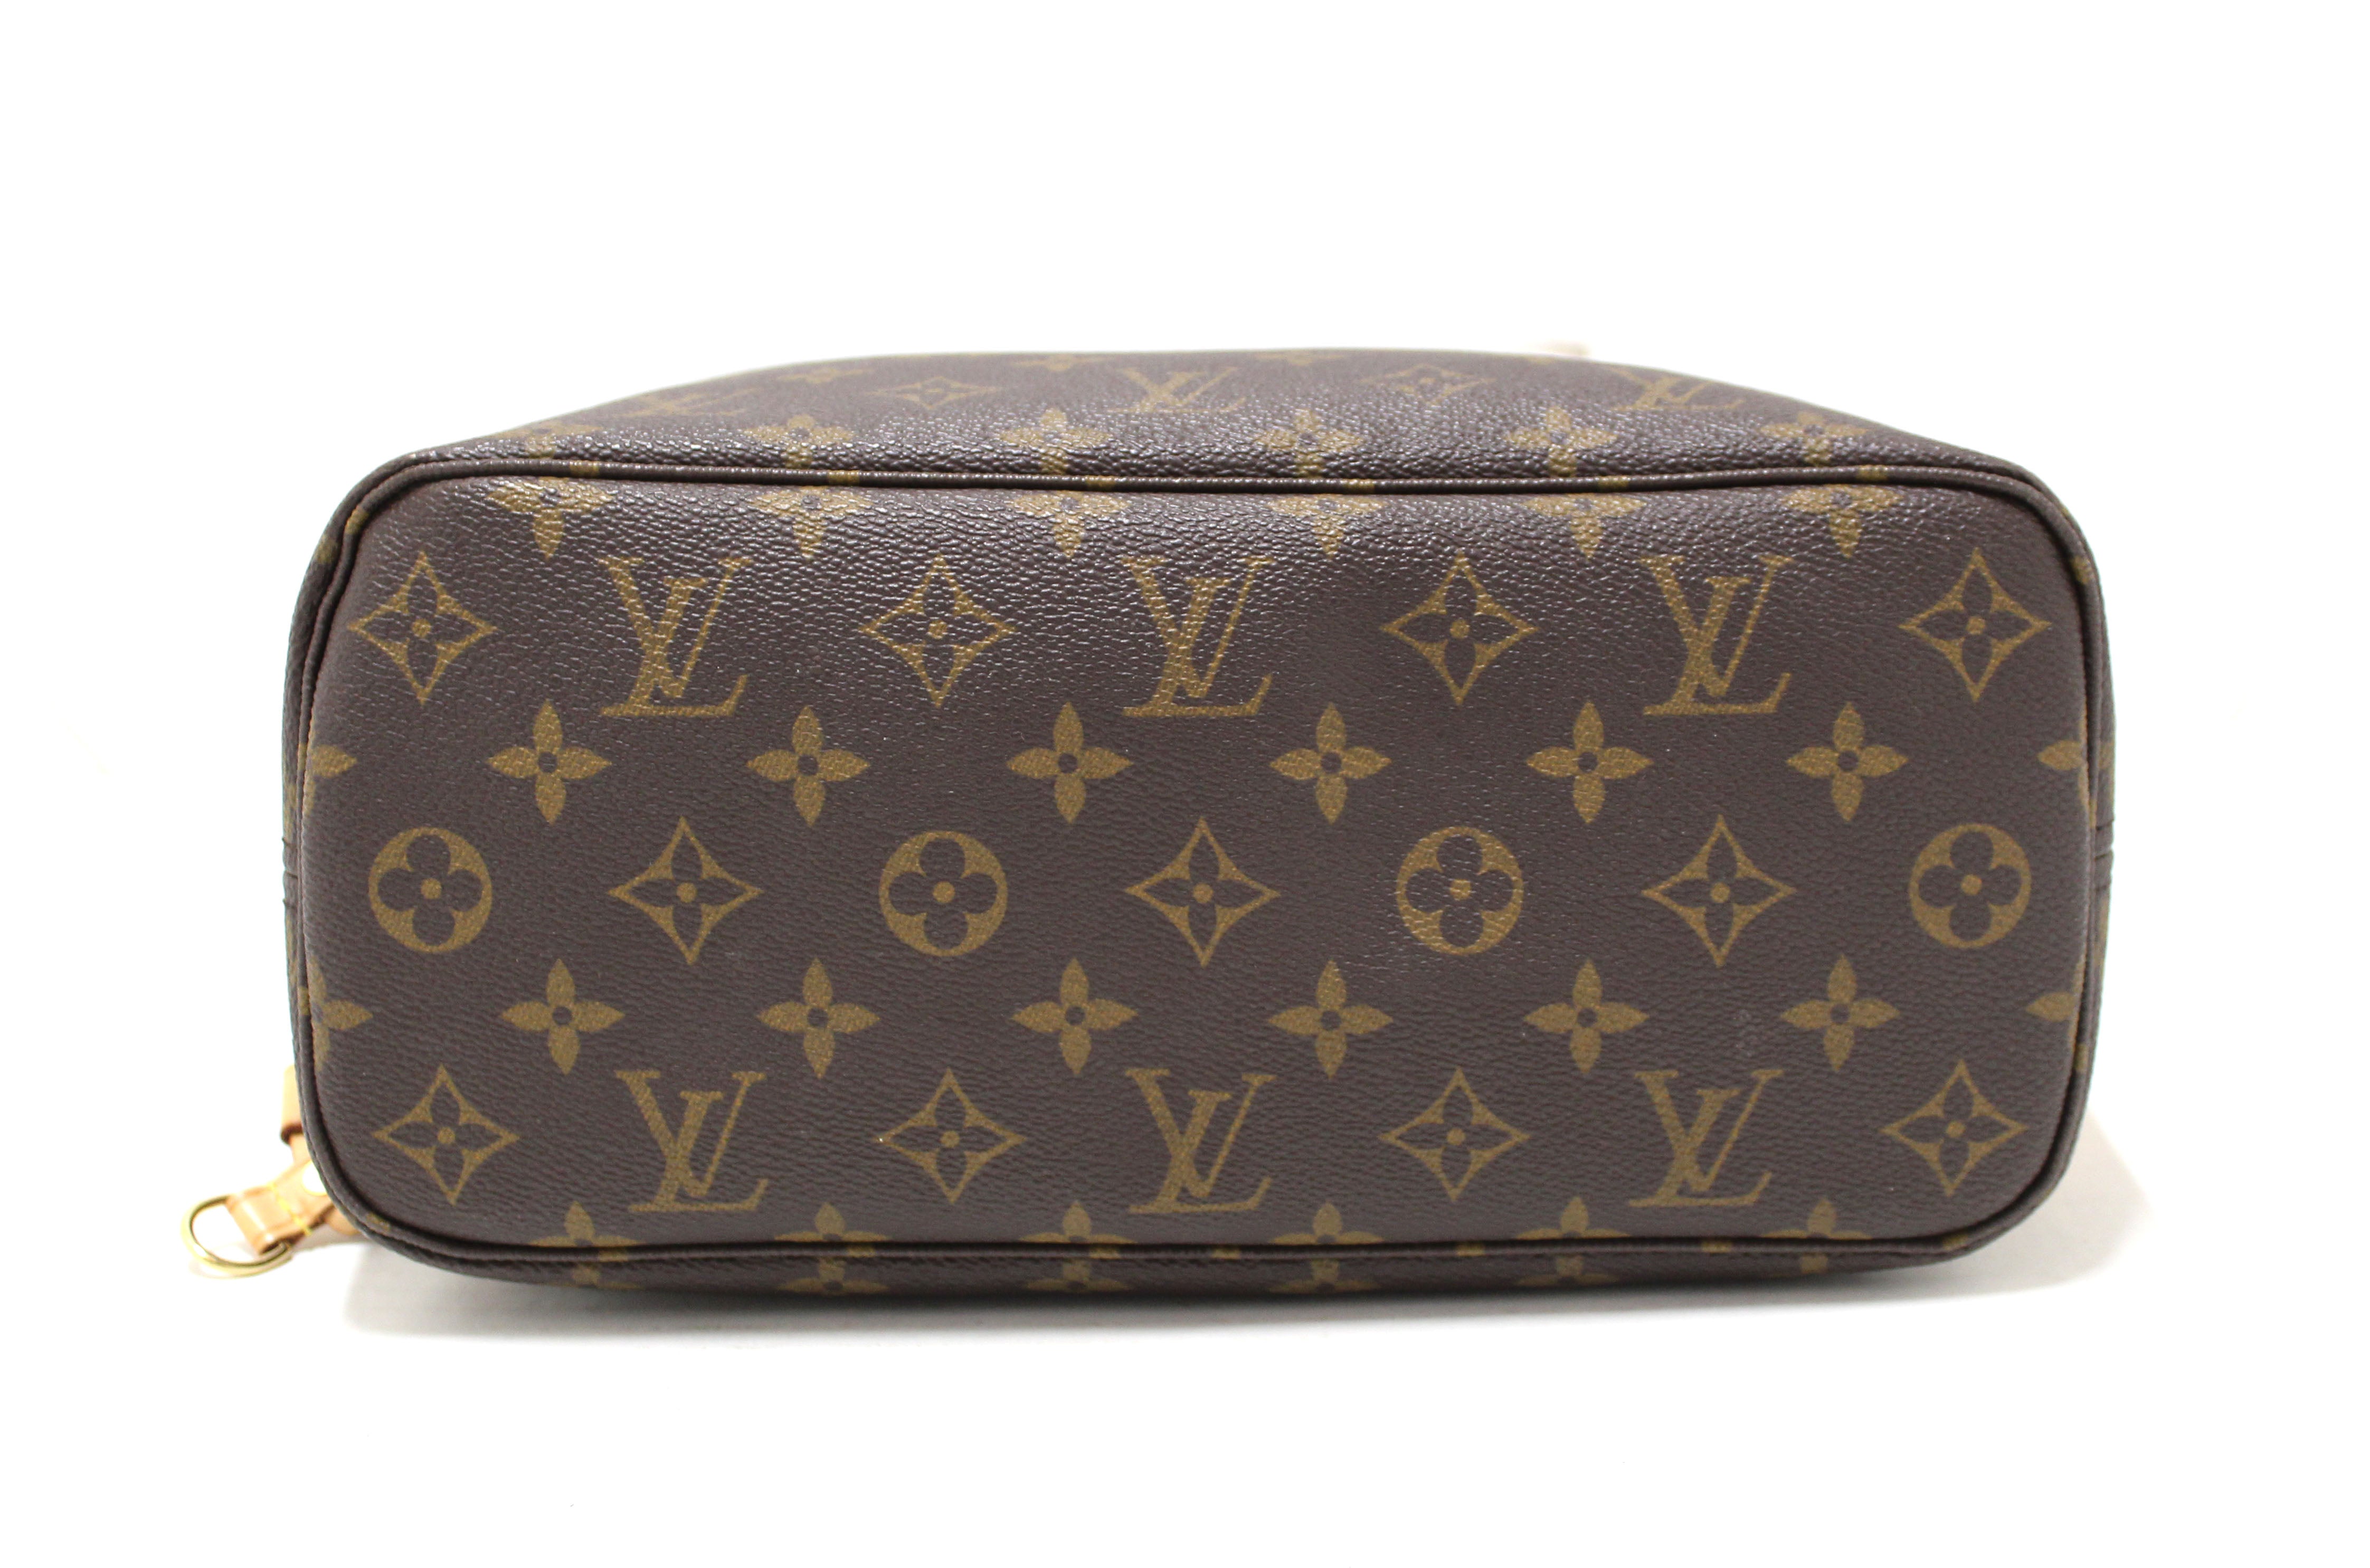 Louis Vuitton Neverfull PM Shoulder Bag VI3067 10293 for Sale in